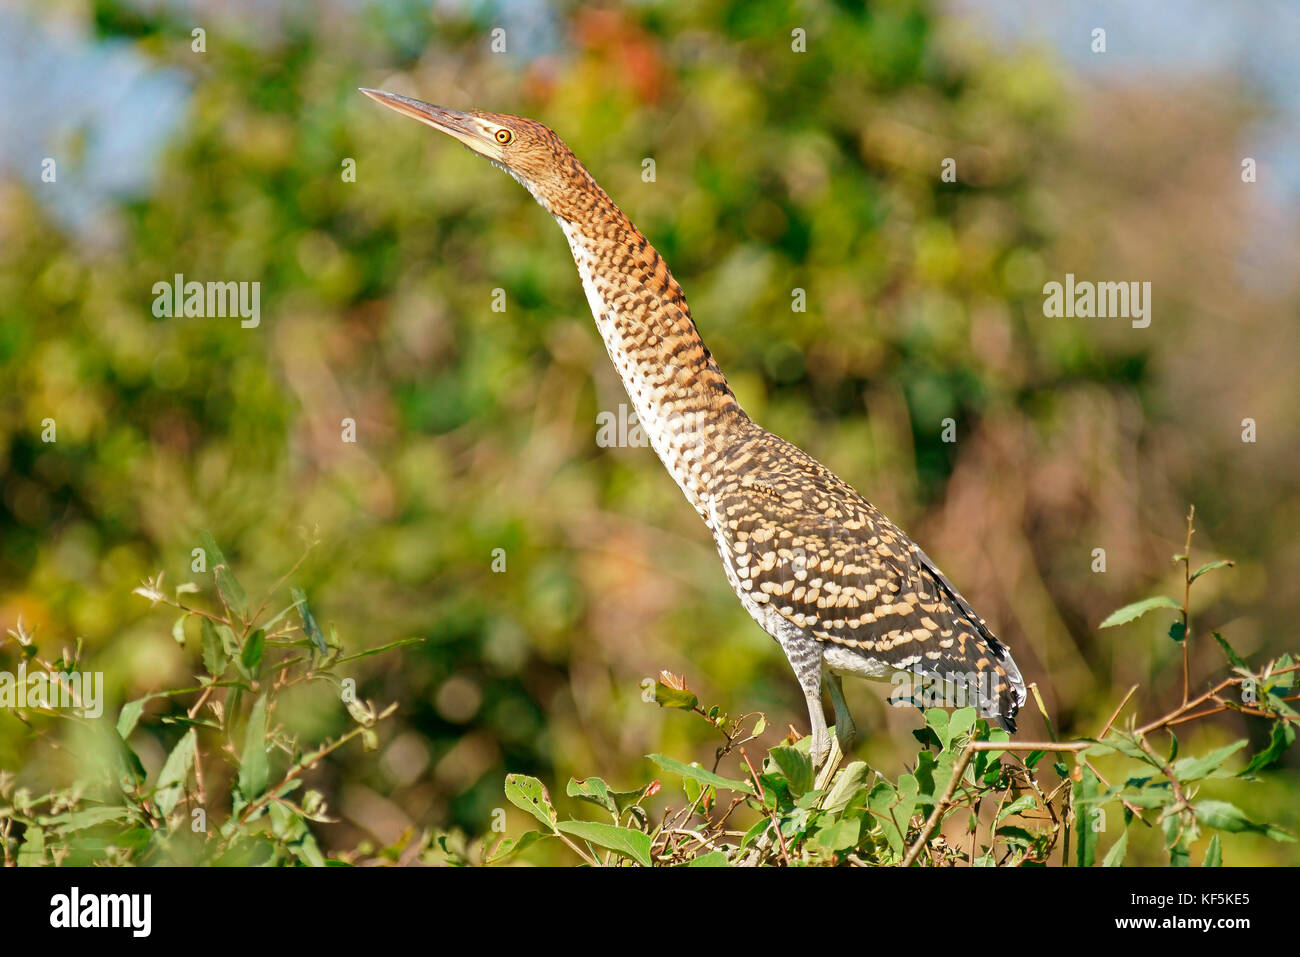 Rufescent tiger heron (Tigrisoma lineatum), Young bird on the lookout, Pantanal, Brazil Stock Photo